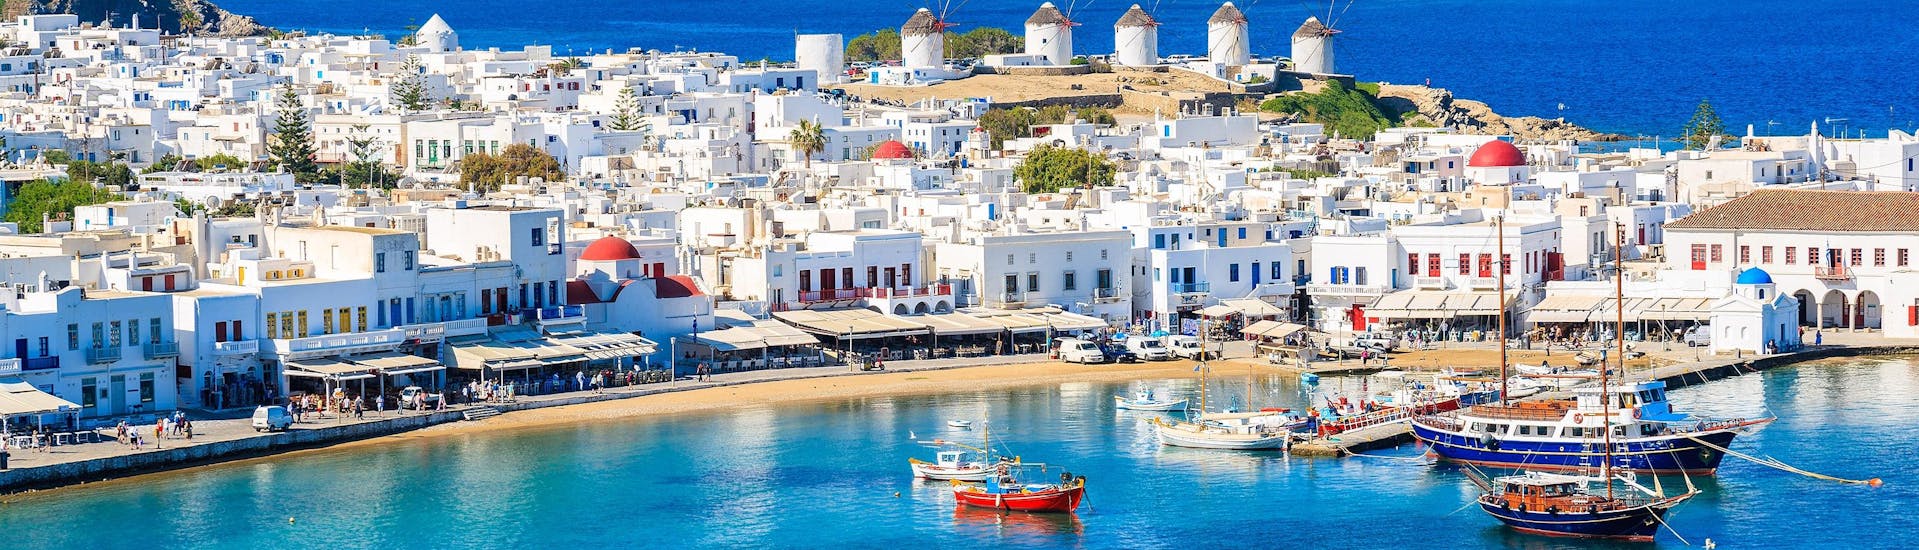 View of the picturesque port of Mykonos, a popular starting point for boat trips around the island of Mykonos.